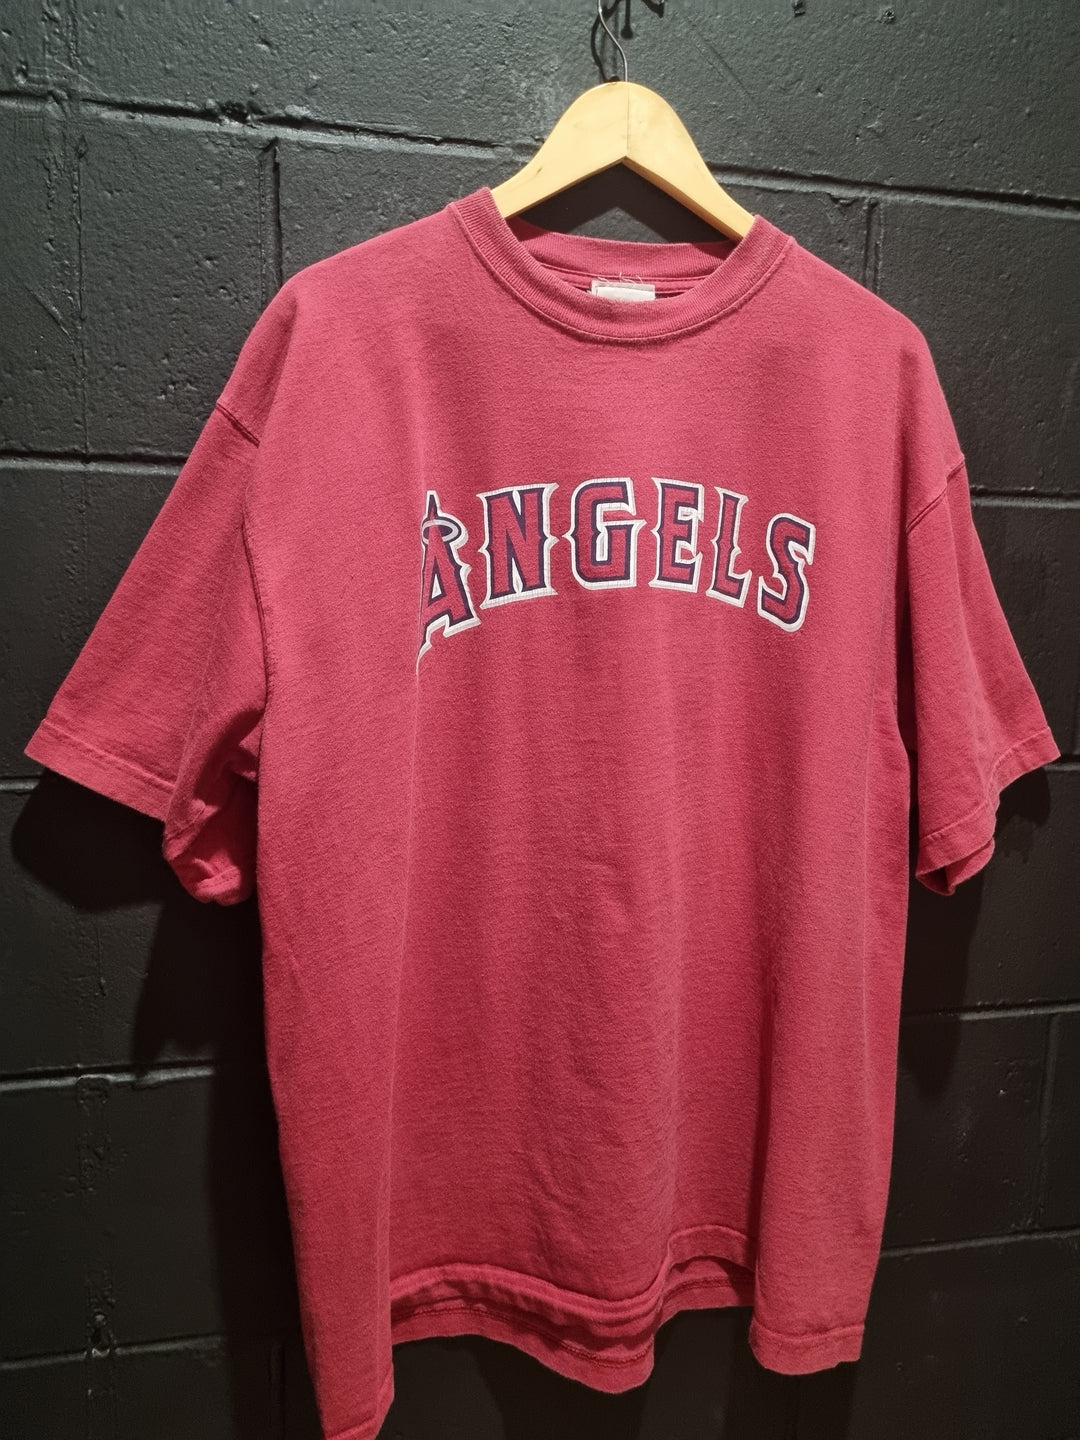 Angels MLB Majestic Made in Mexico XL